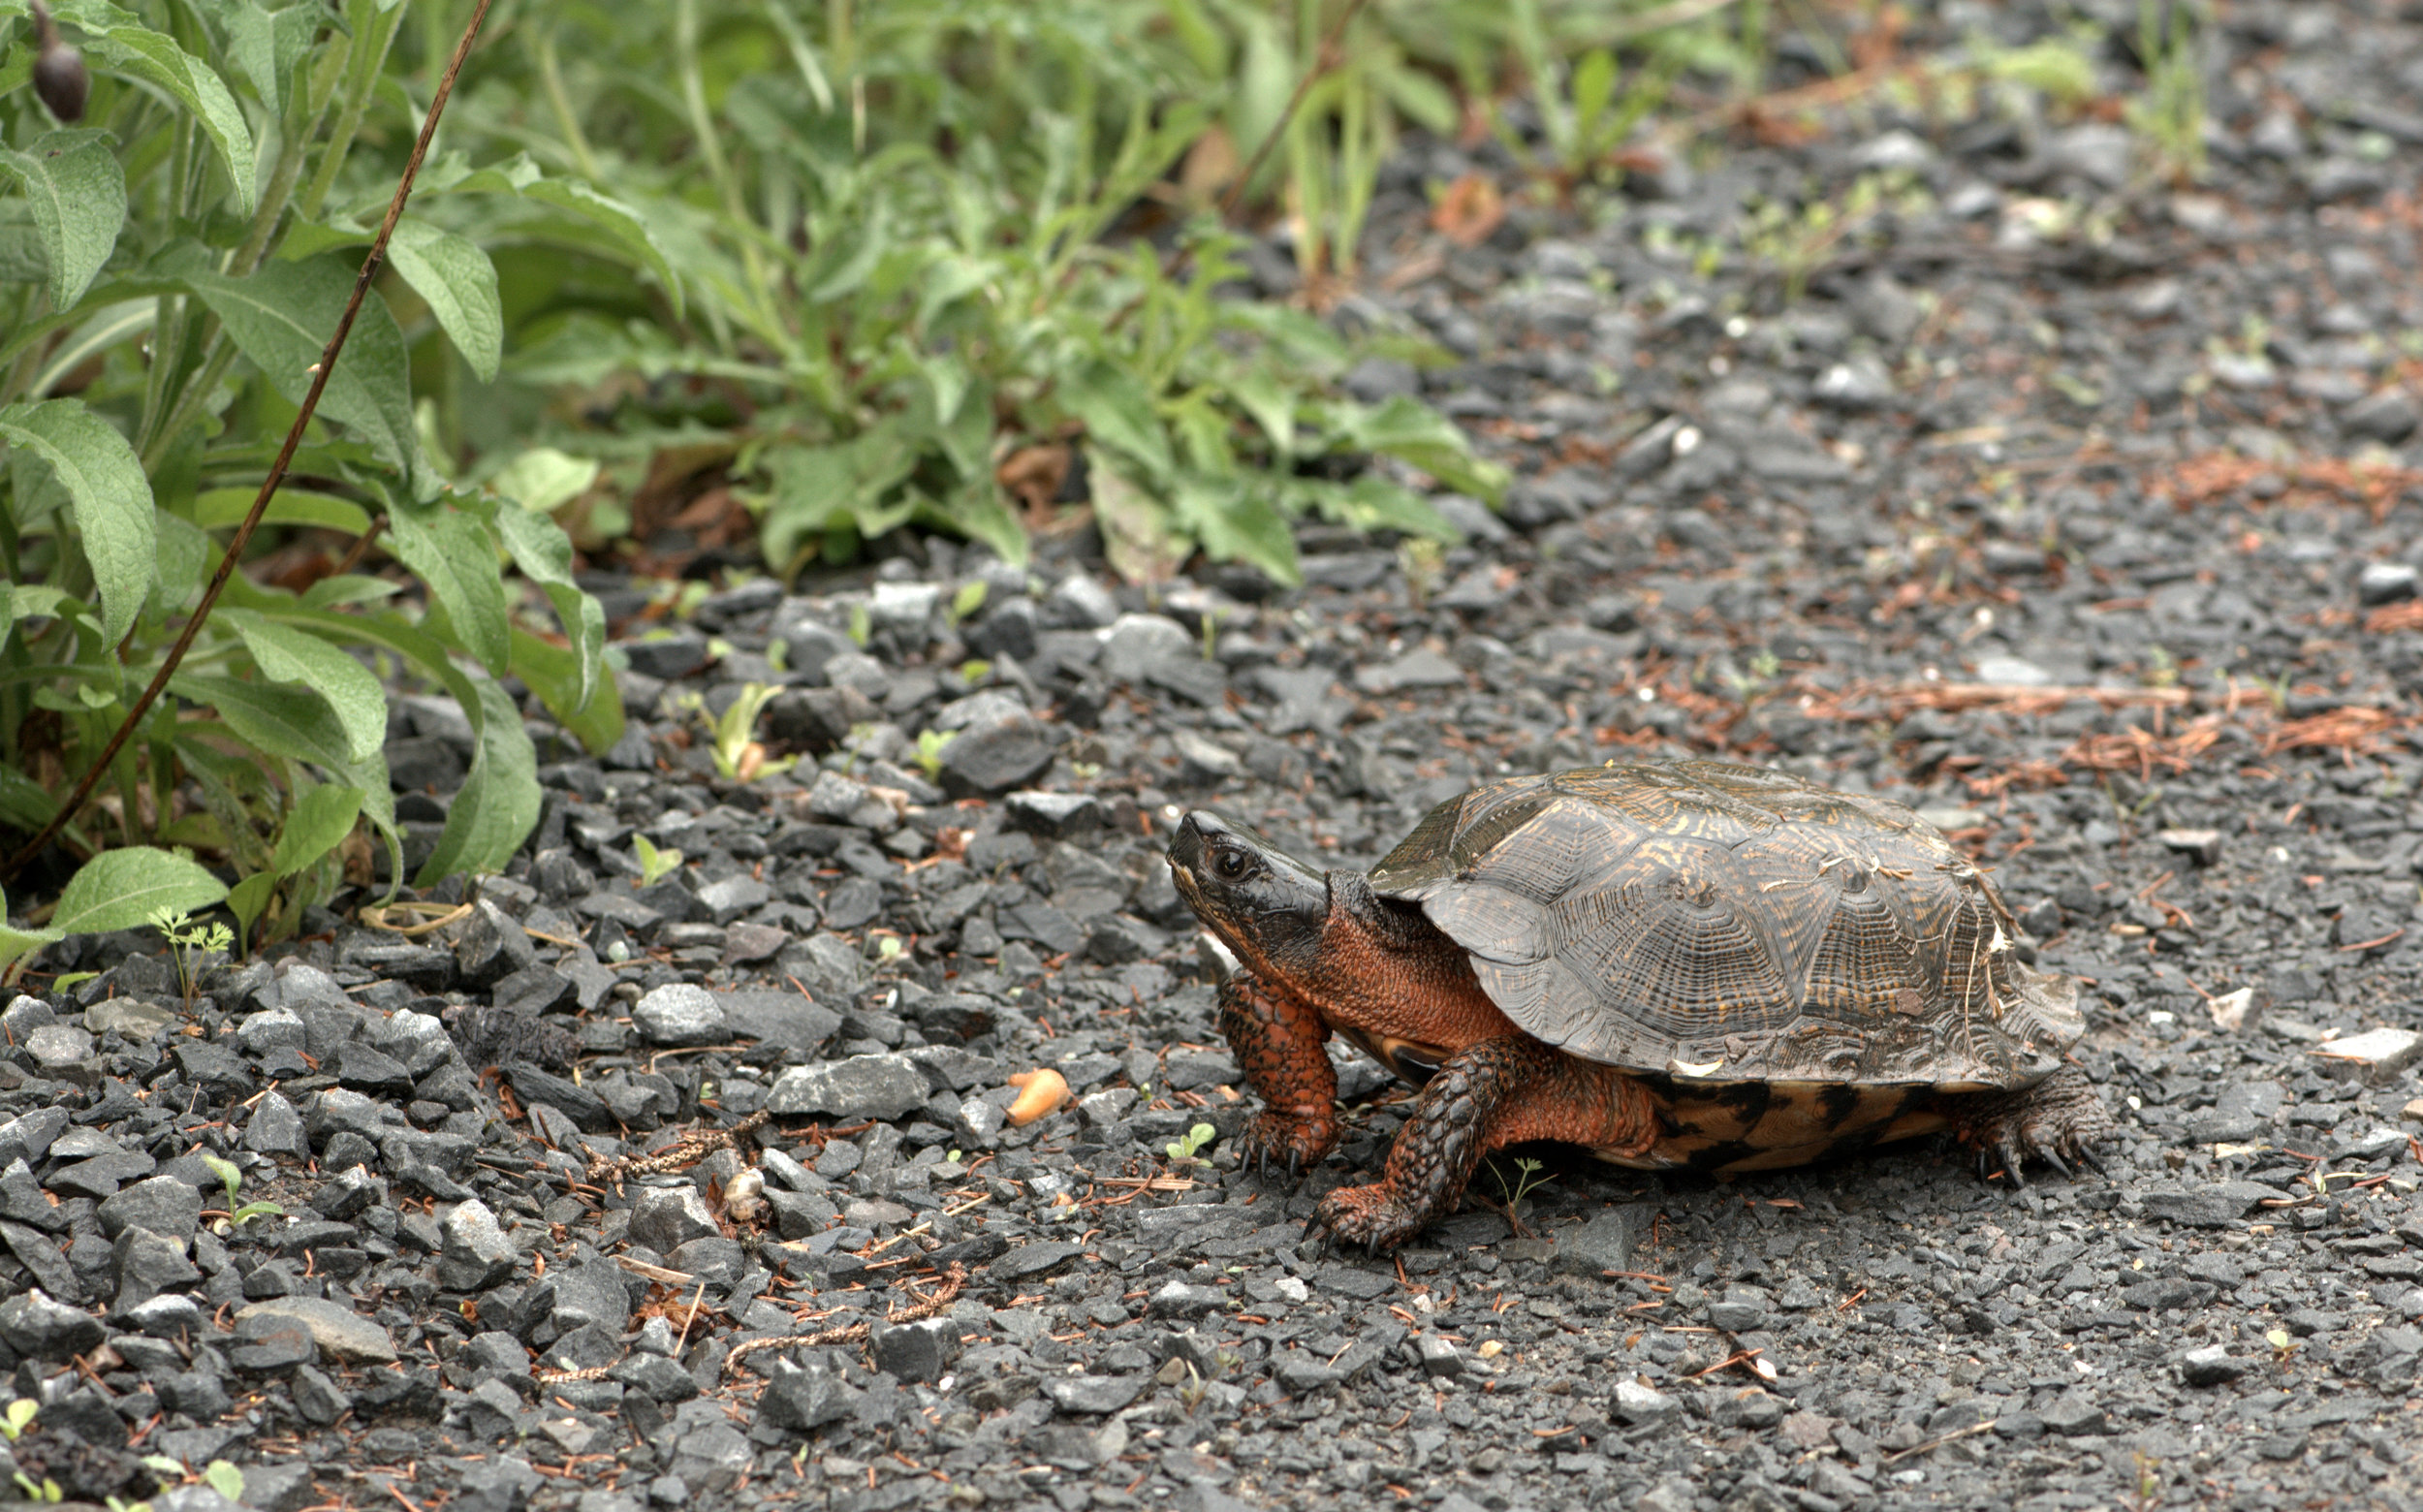 rare wood turtle at forest edge.jpg